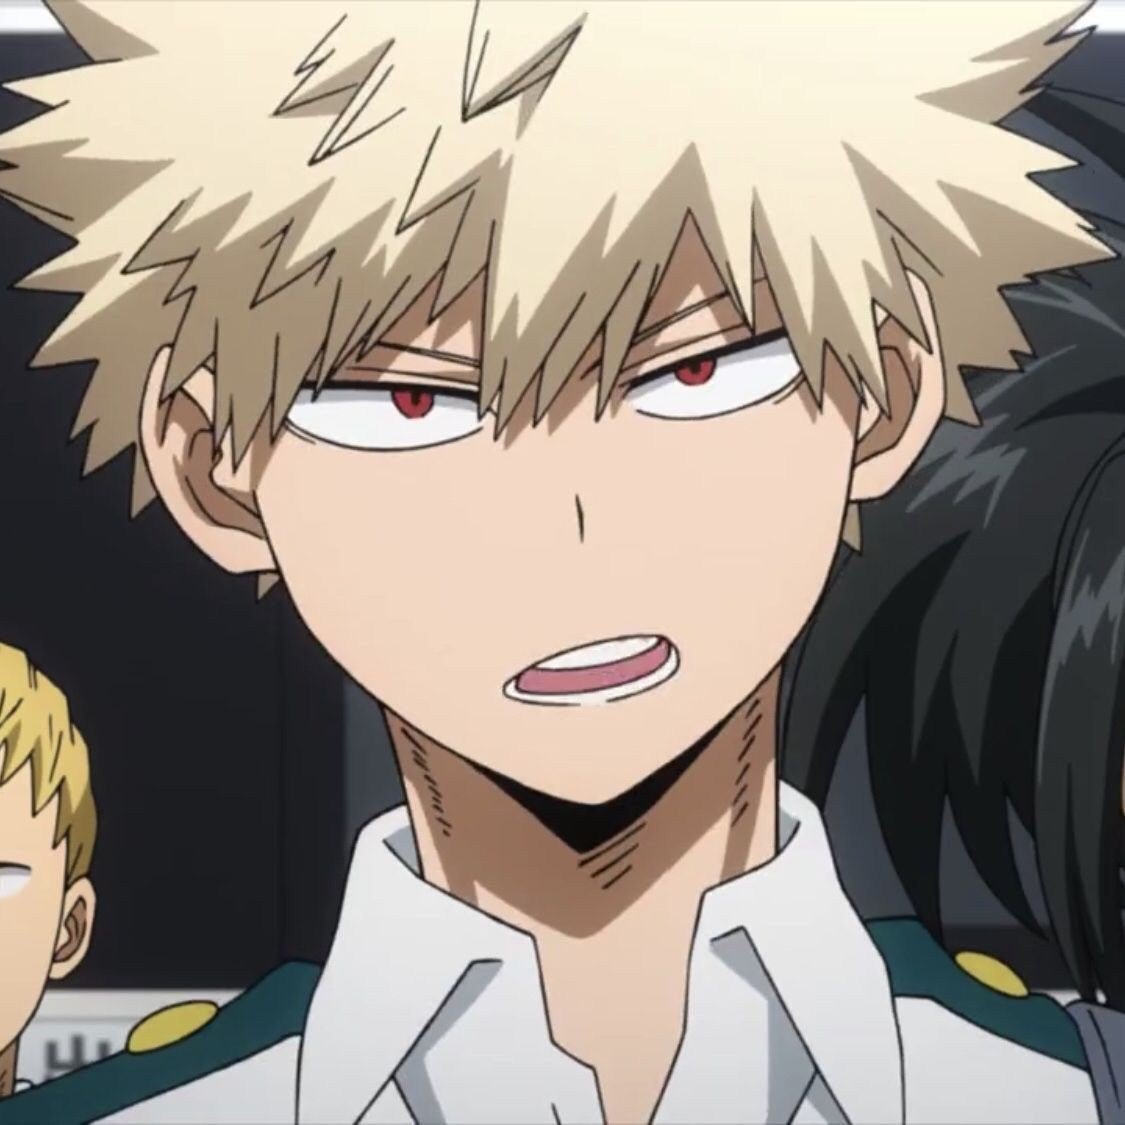 Anime News Network on X: Today is the birthday of Katsuki Baguko from My  Hero Academia! Let's give him a like, comment, and RT to wish him HBD 🎉🍰  t.codSZP1wxg0a  X